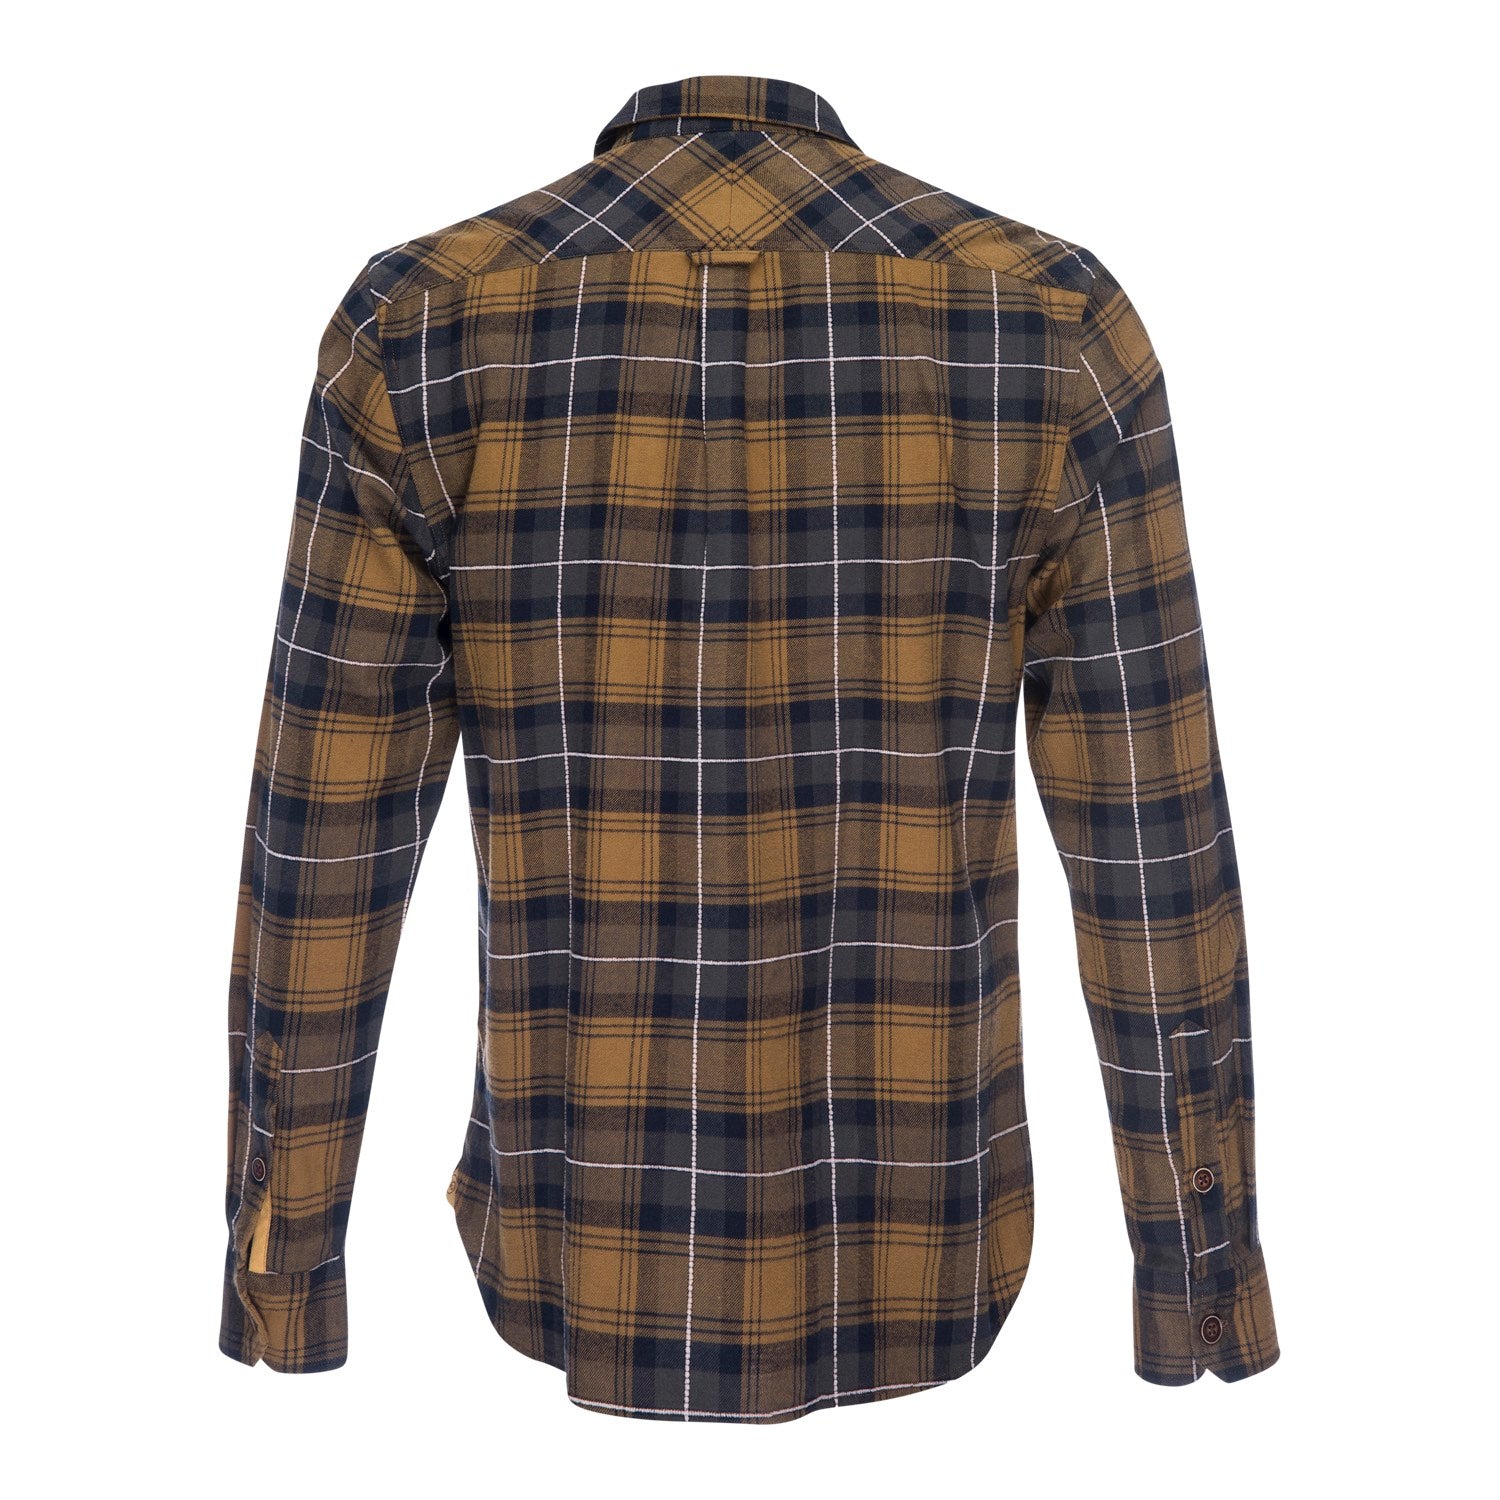 Truman Outdoor Shirt in Dobby Plaid